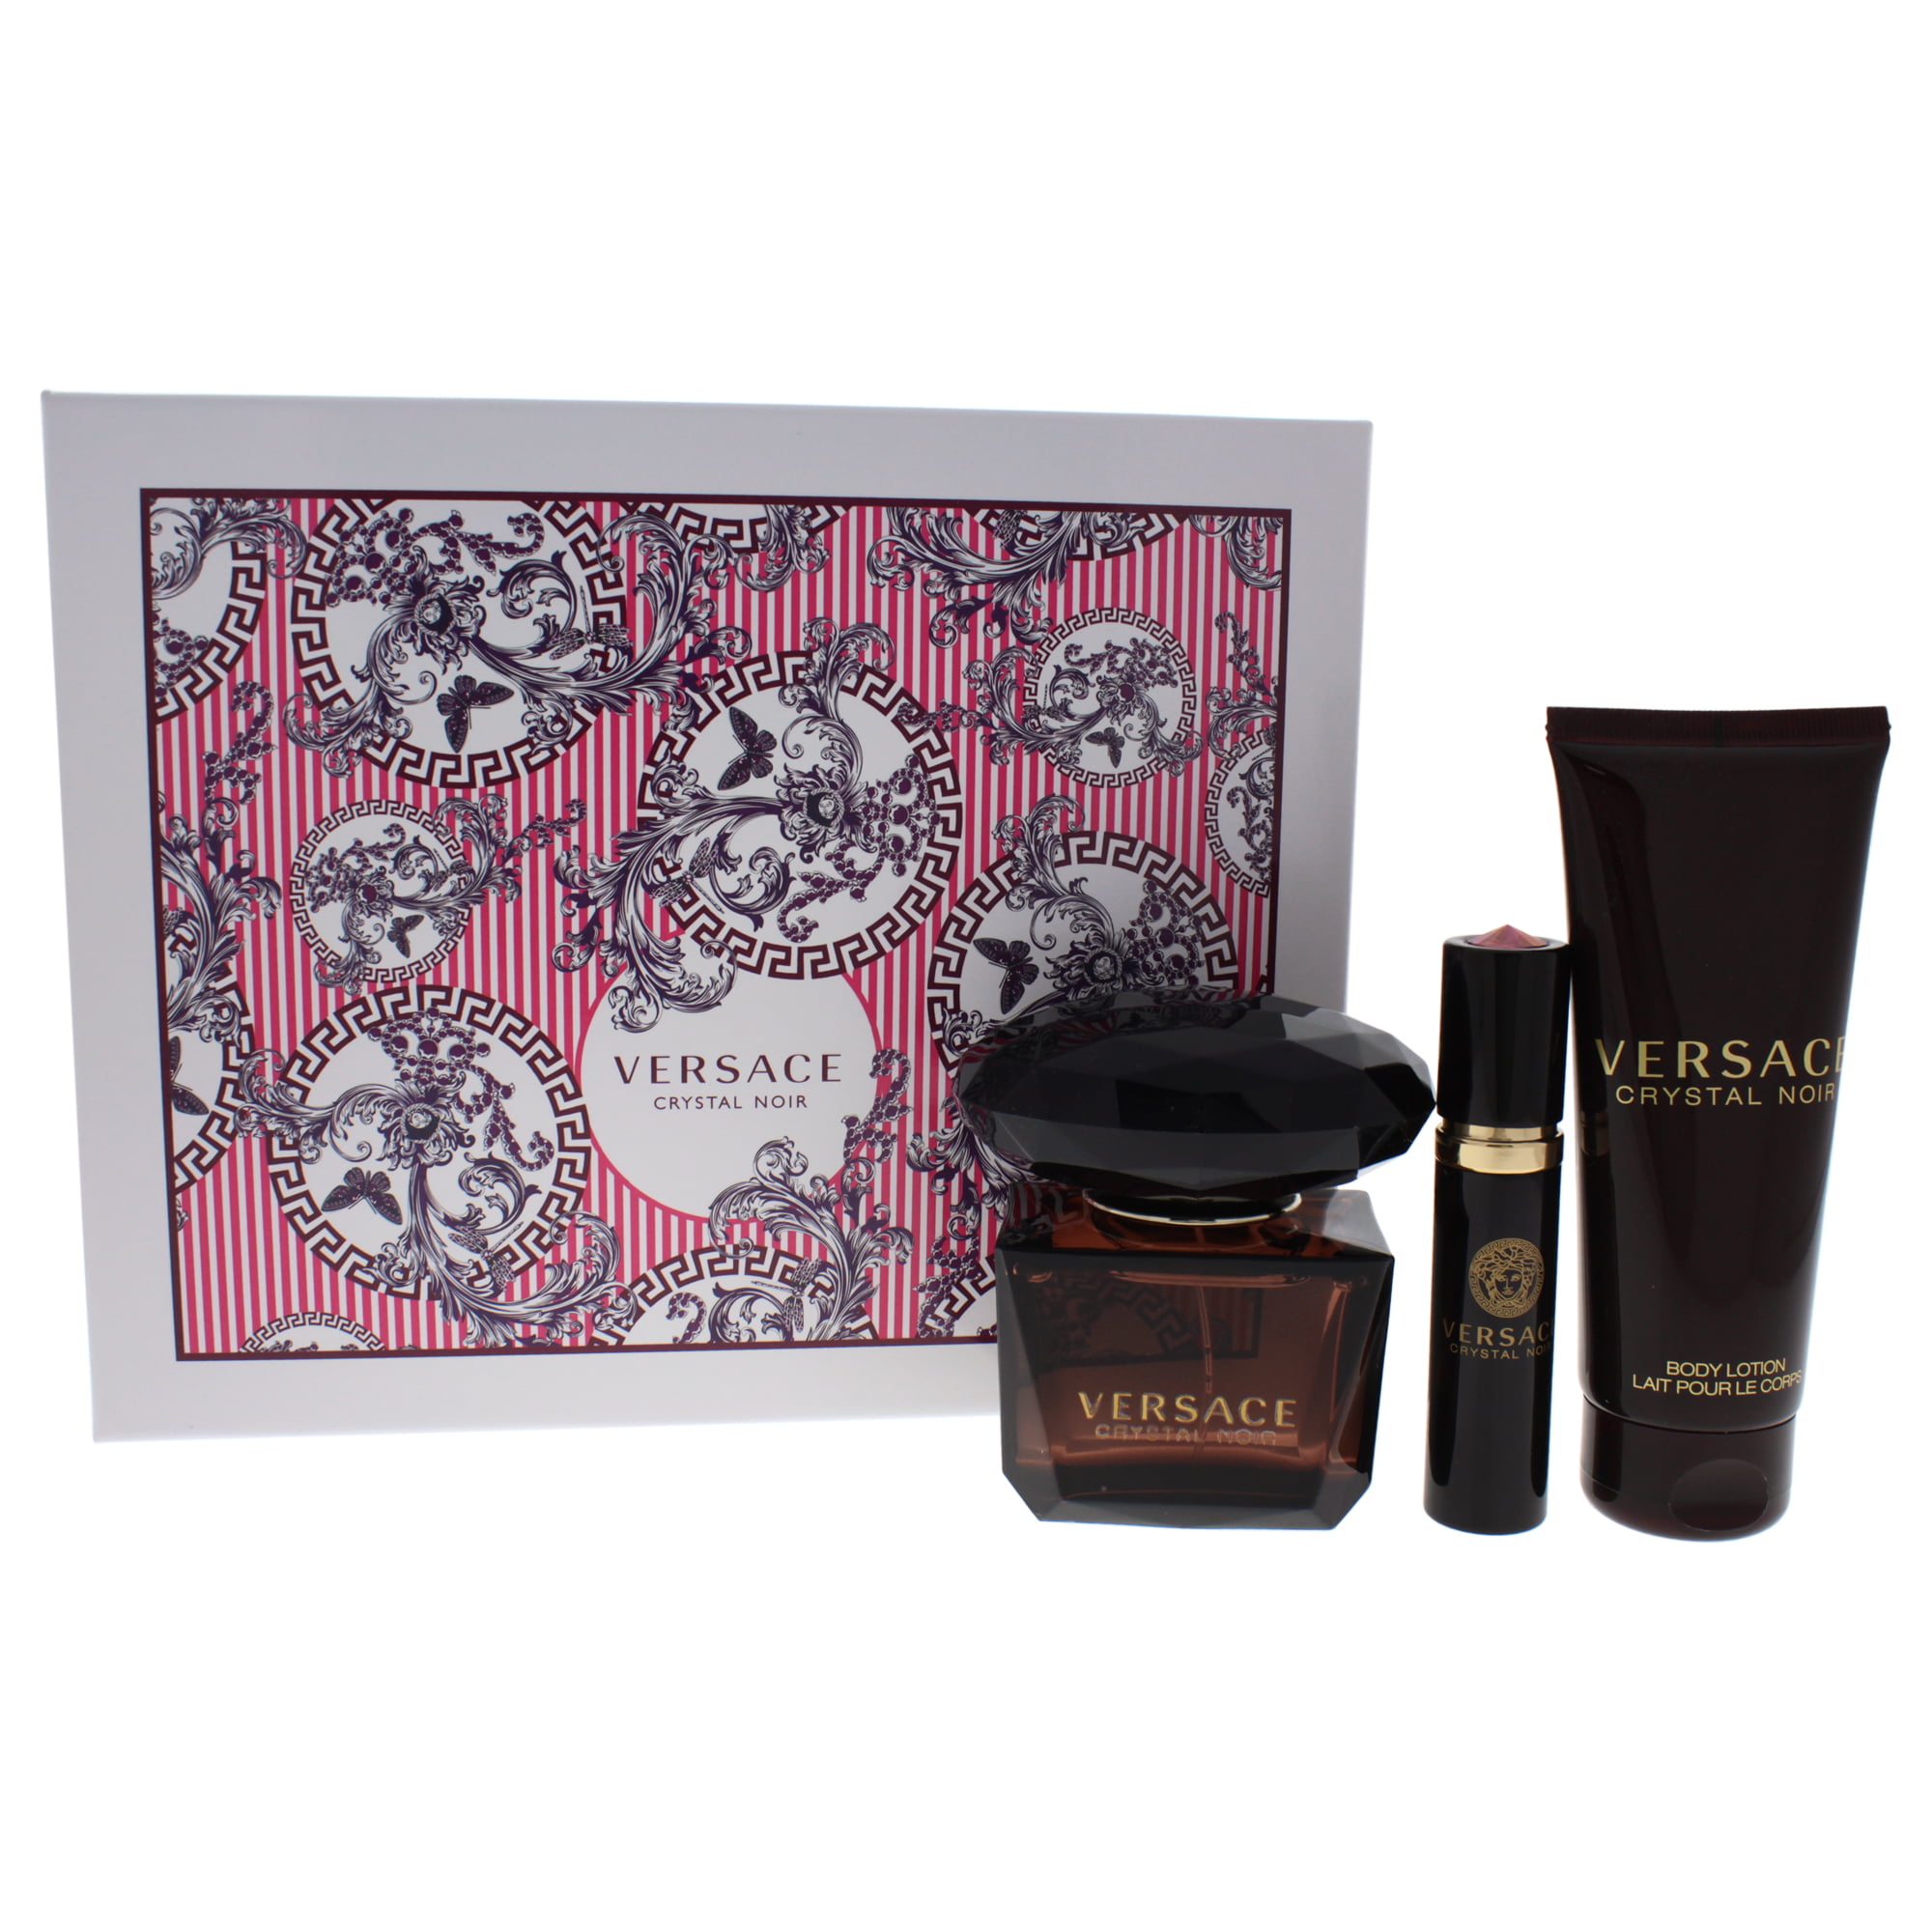 Versace - Versace Crystal Noir by Versace for Women - 3 Pc Gift Set 3oz ...